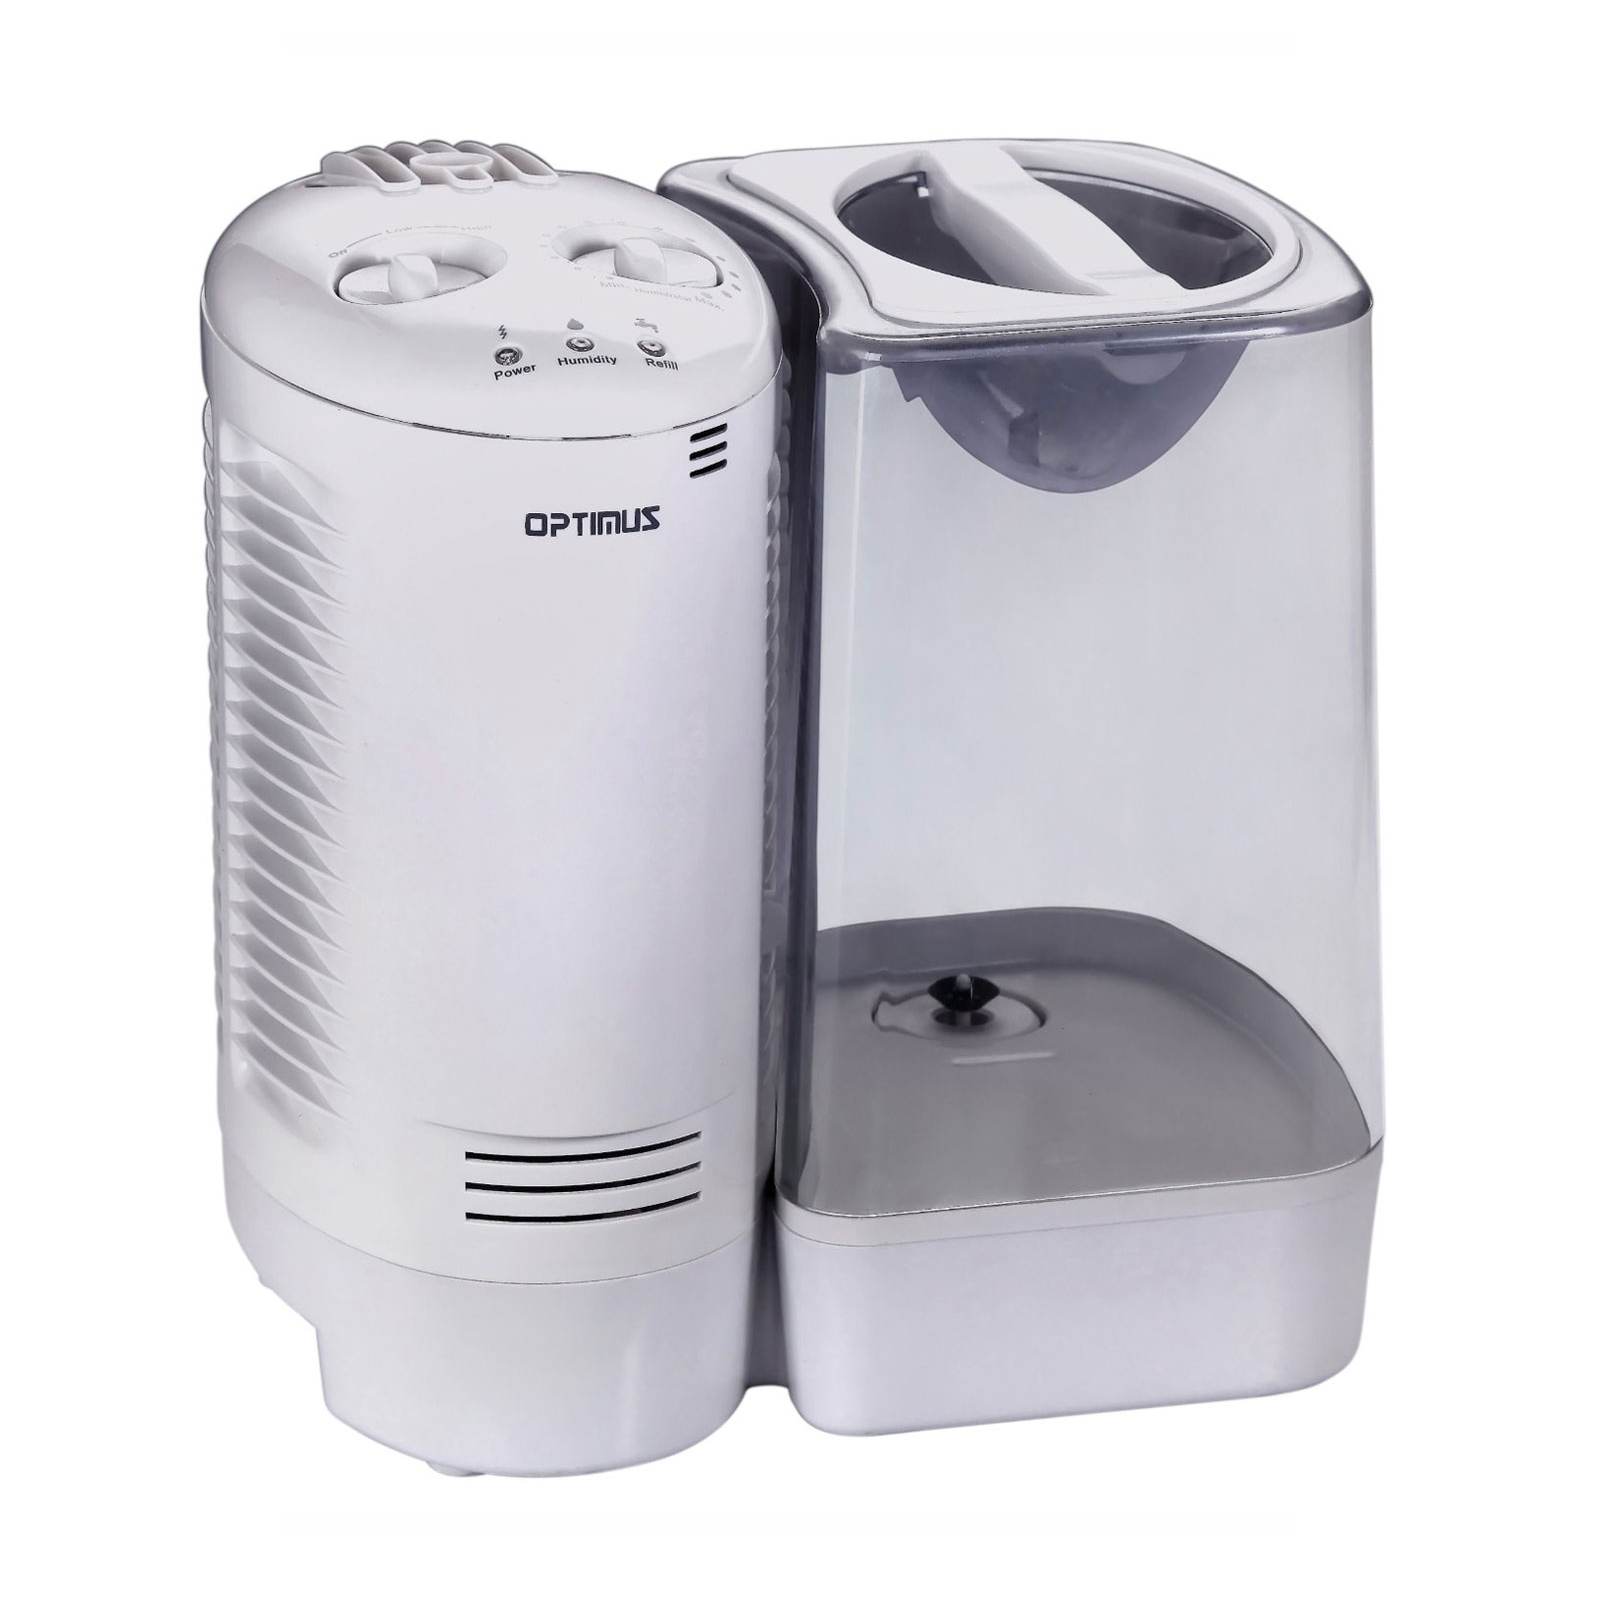 Optimus 97079732M 3 Gallon Warm Mist Humidifier with Wicking Vapor System